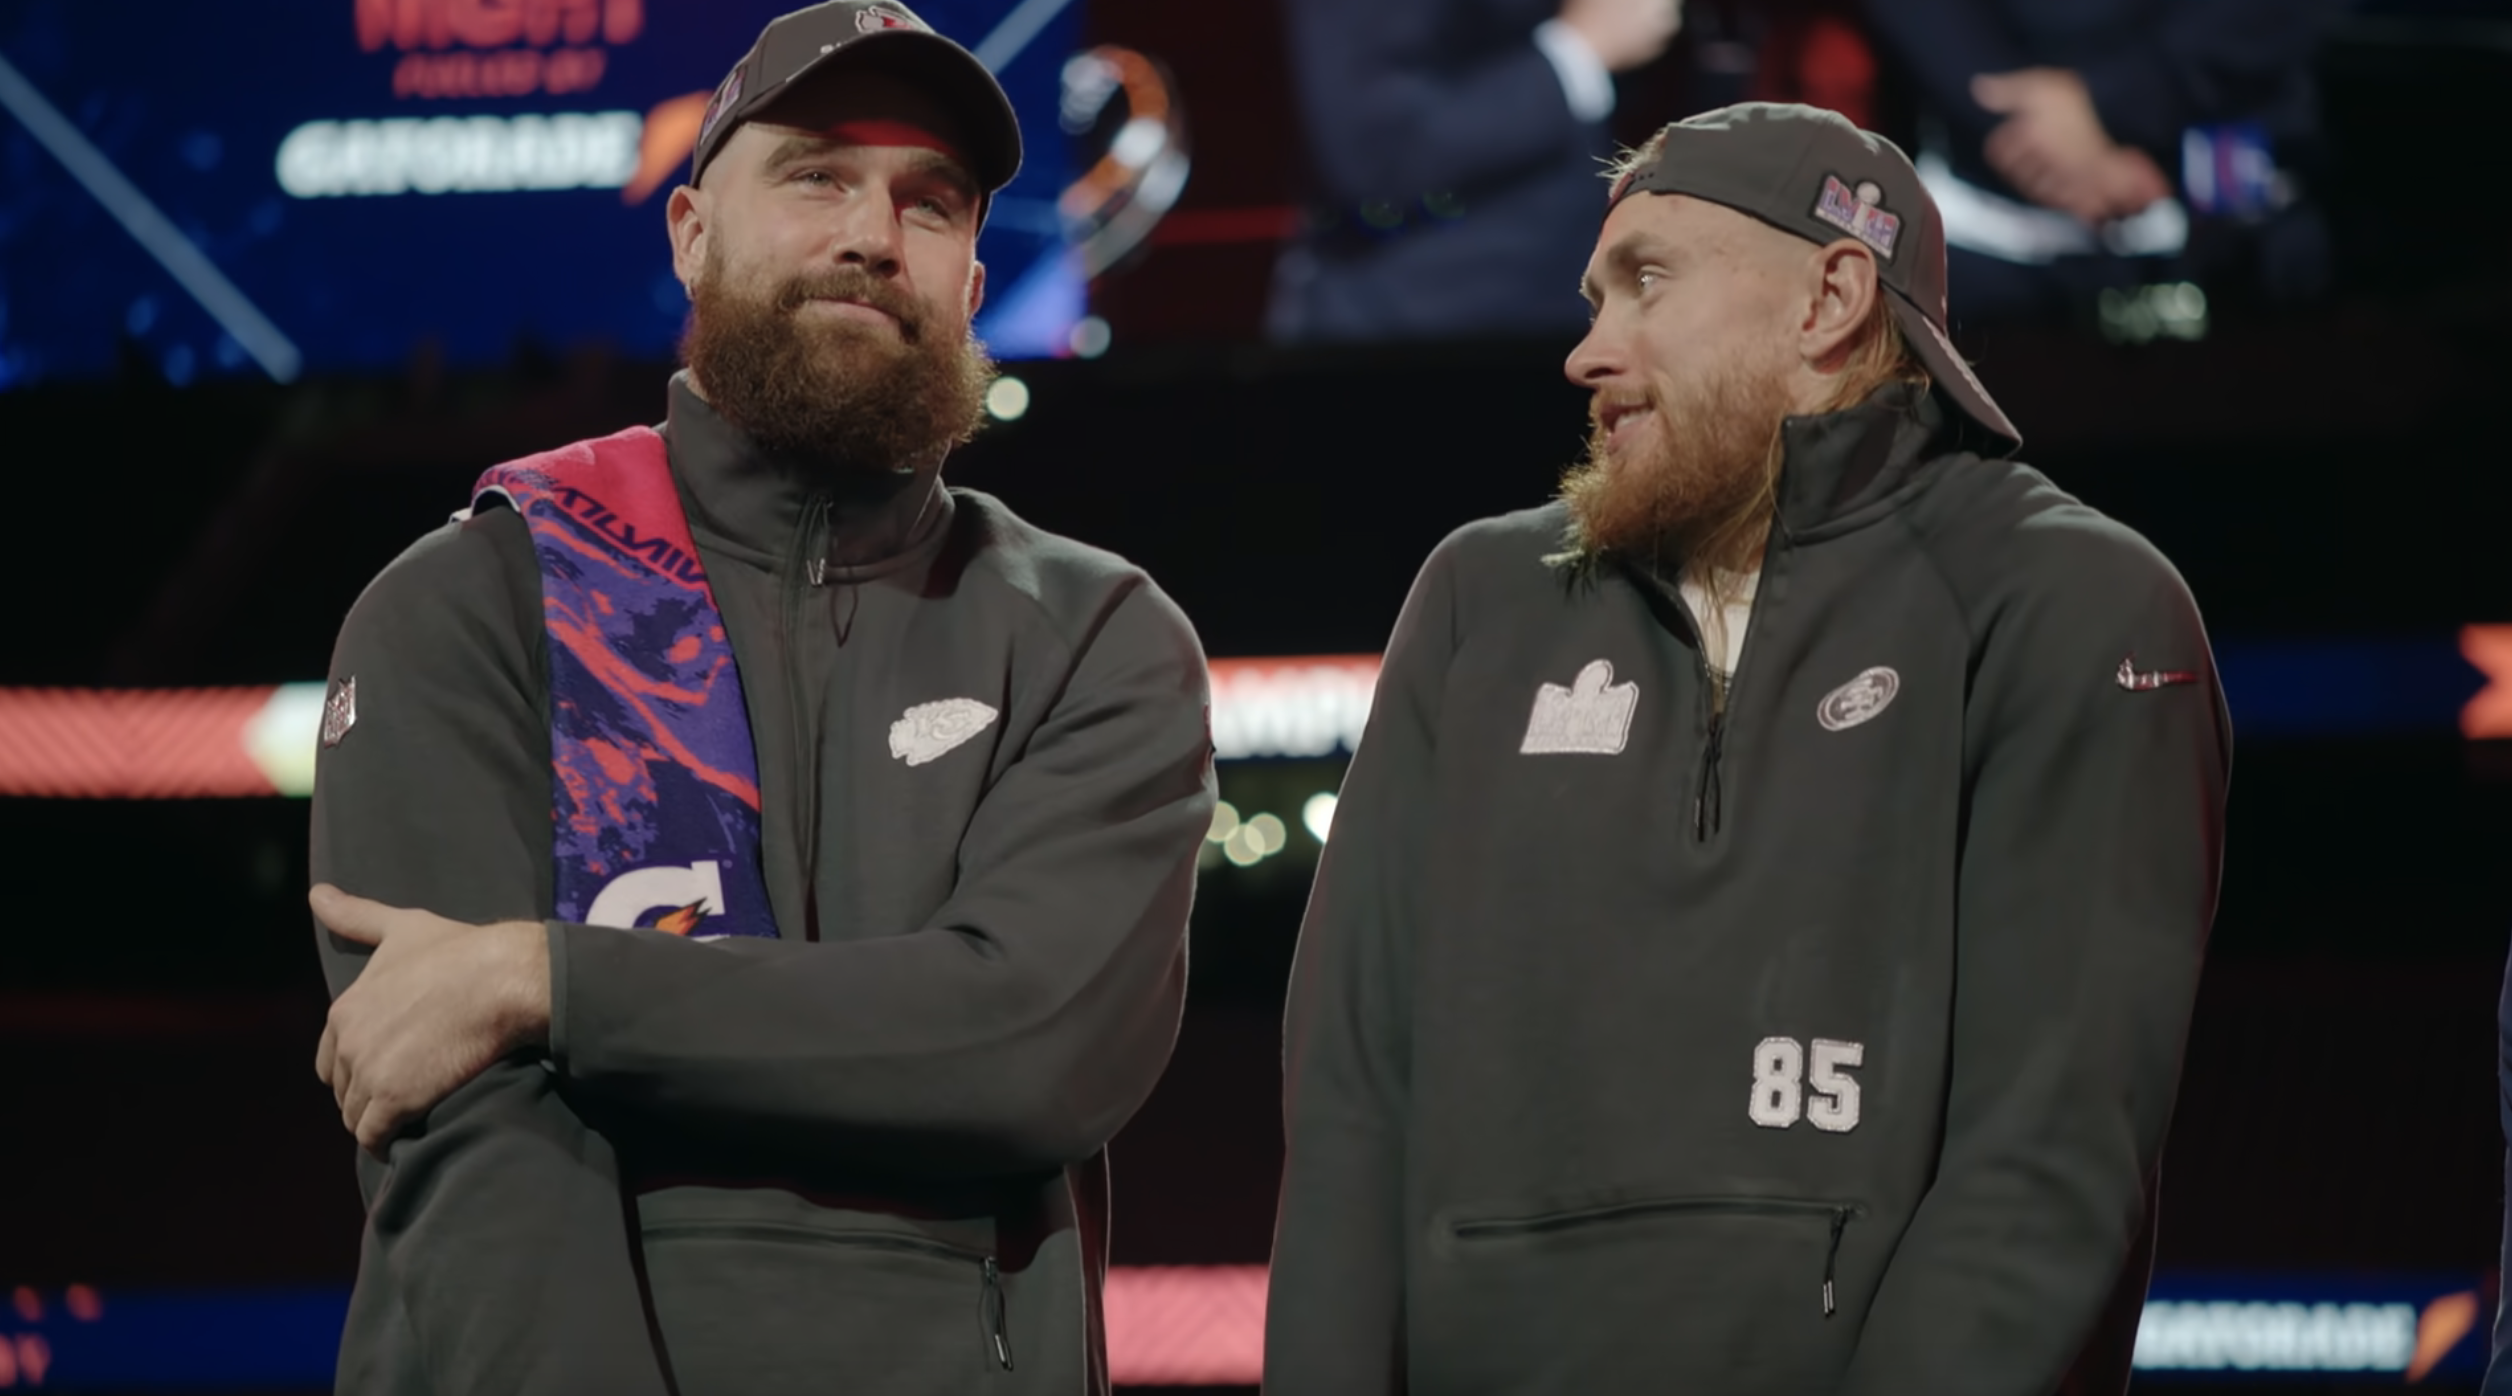 Travis Kelce and George Kittle on stage wearing casual sports hoodies and caps, smiling and interacting with each other